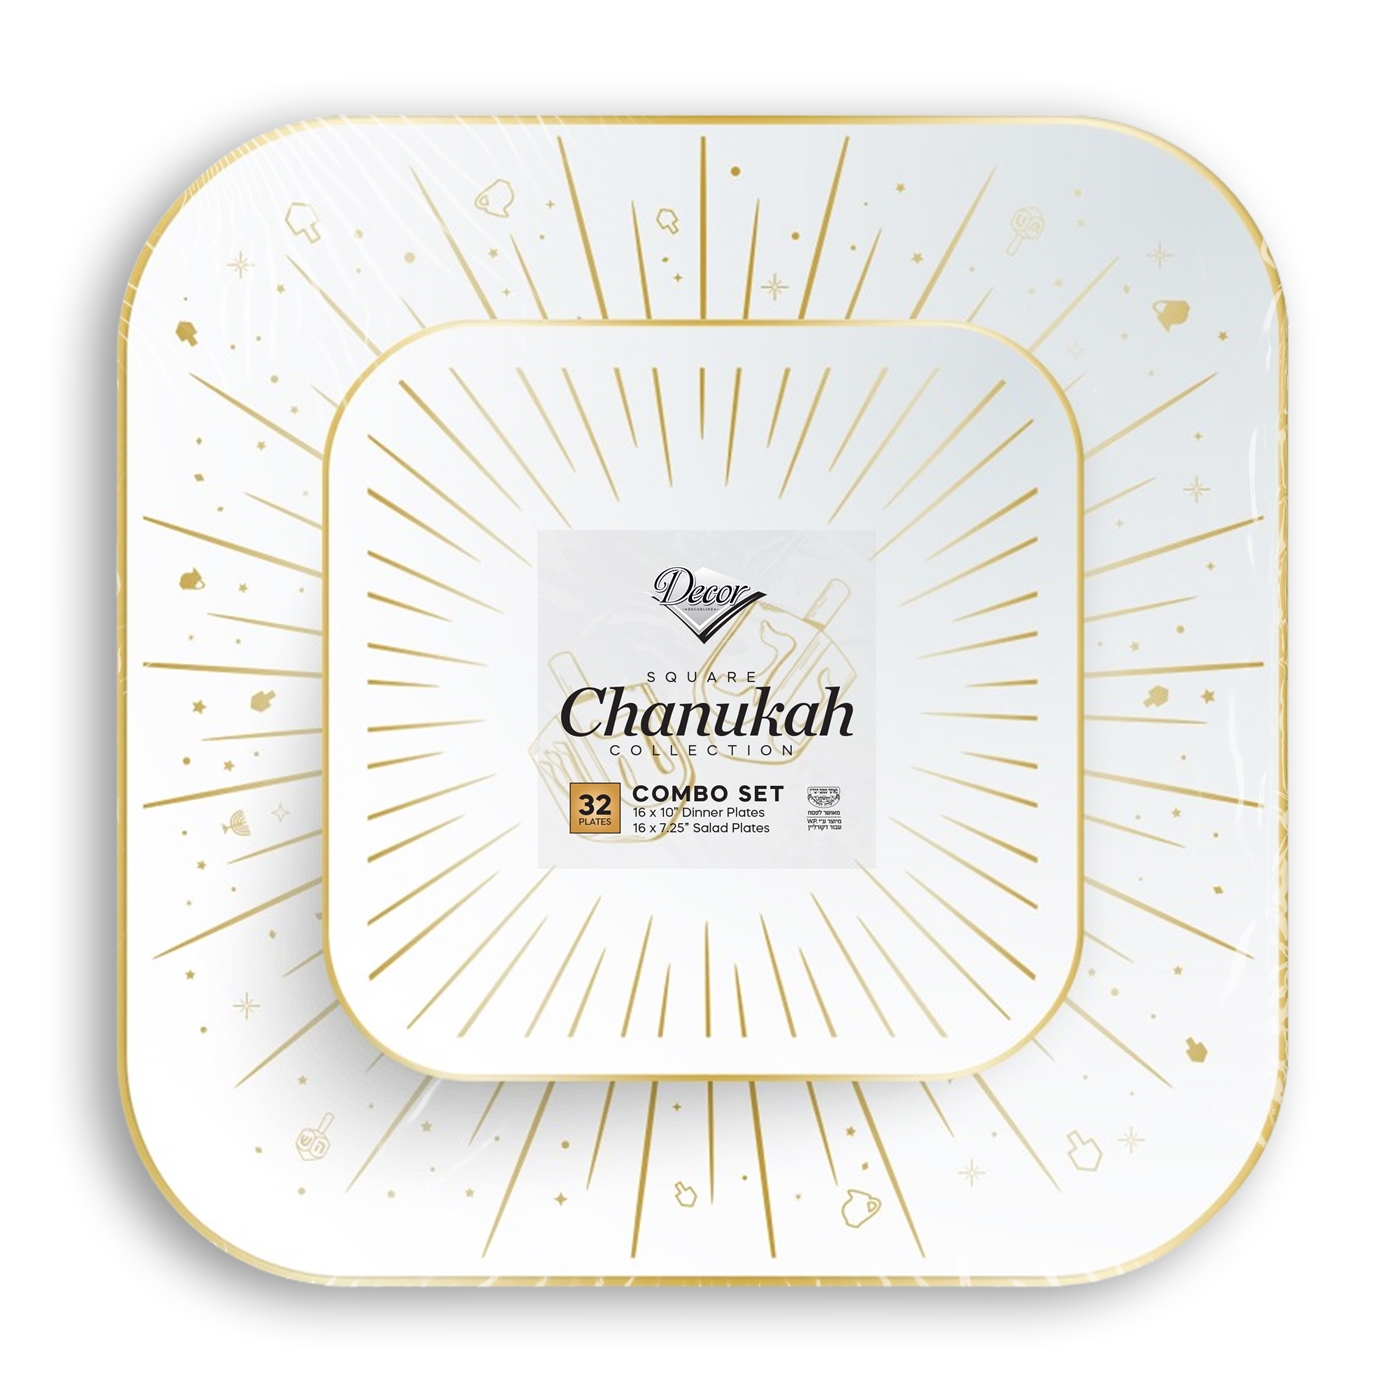 Decor Square Chanukah Collection White with Gold